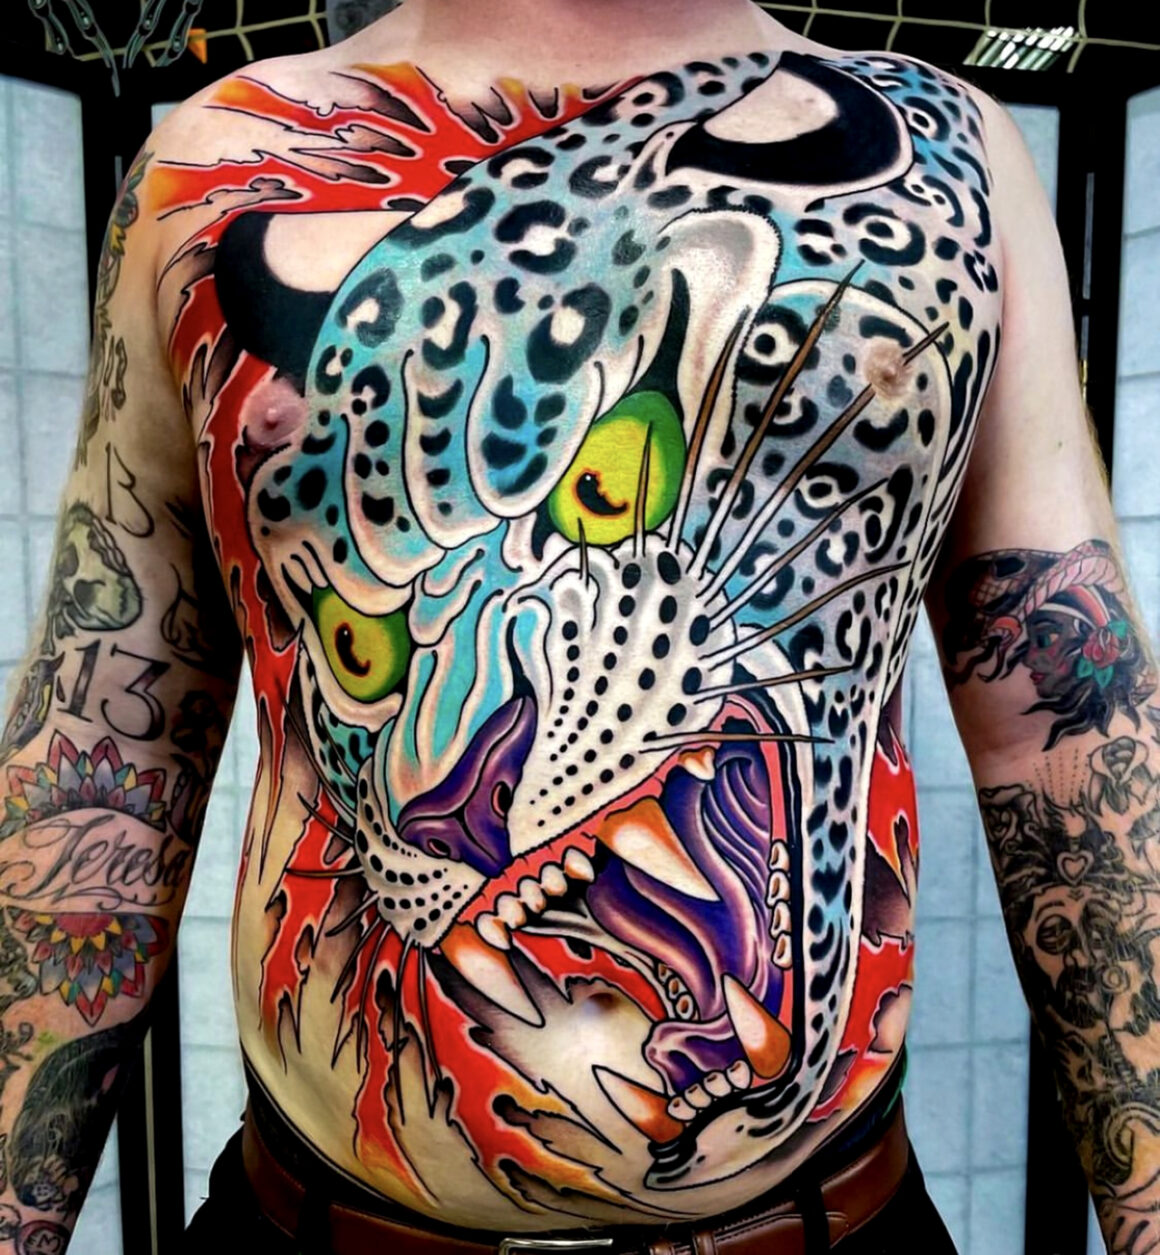 Bold and powerful animals in American Traditional Tattoo style - Tattoo Life